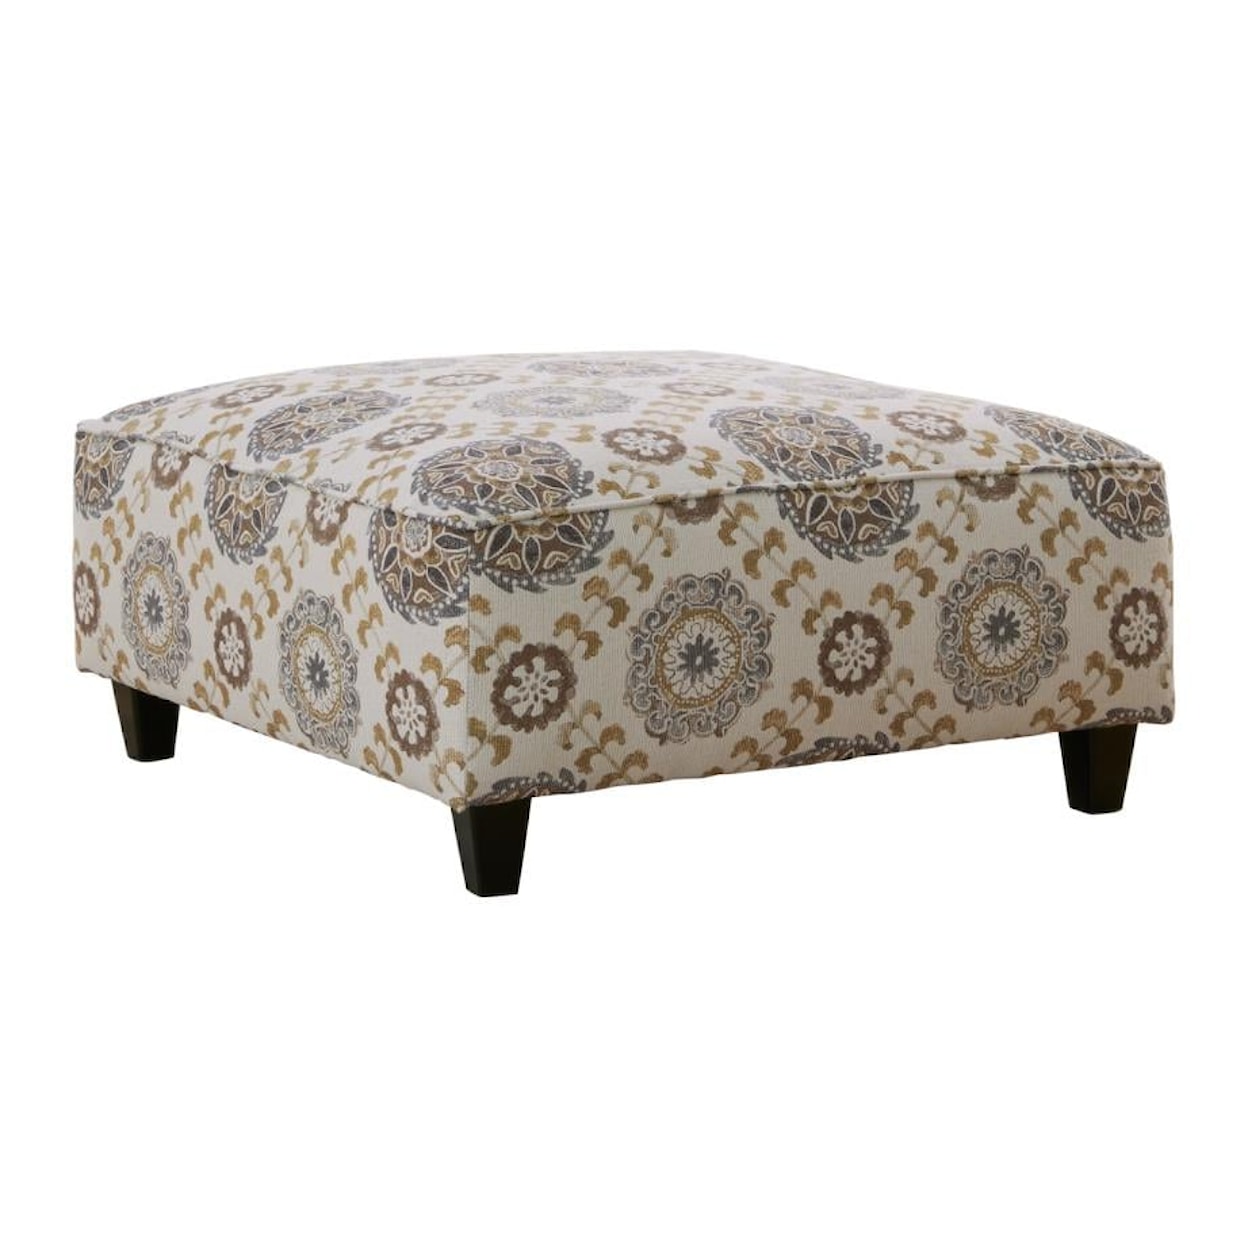 Fusion Furniture 4250 CROSSROADS MINK Medallion Cocktail Ottoman with Wooden Legs